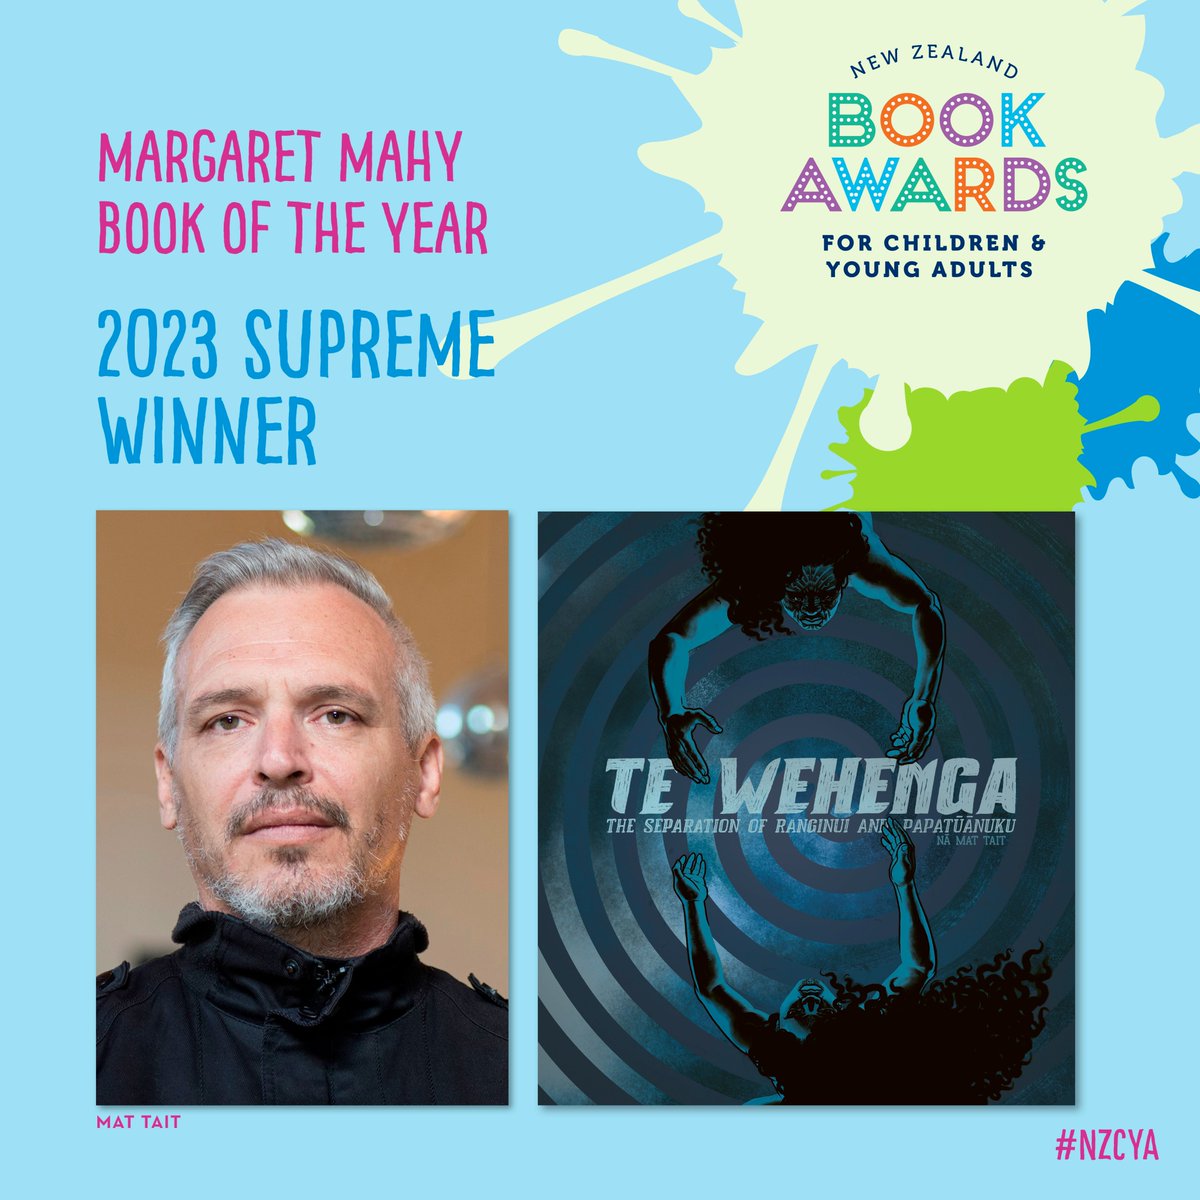 The Margaret Mahy Book of the Year goes to ‘Te Wehenga: The Separation of Ranginui and Papatūānuku’ written and illustrated by Mat Tait, published by @AllenAndUnwinNZ. “A taonga, to be shared, closely read and enjoyed in both te reo Māori and te reo Pākehā.” #NZCYA #BooksAlive